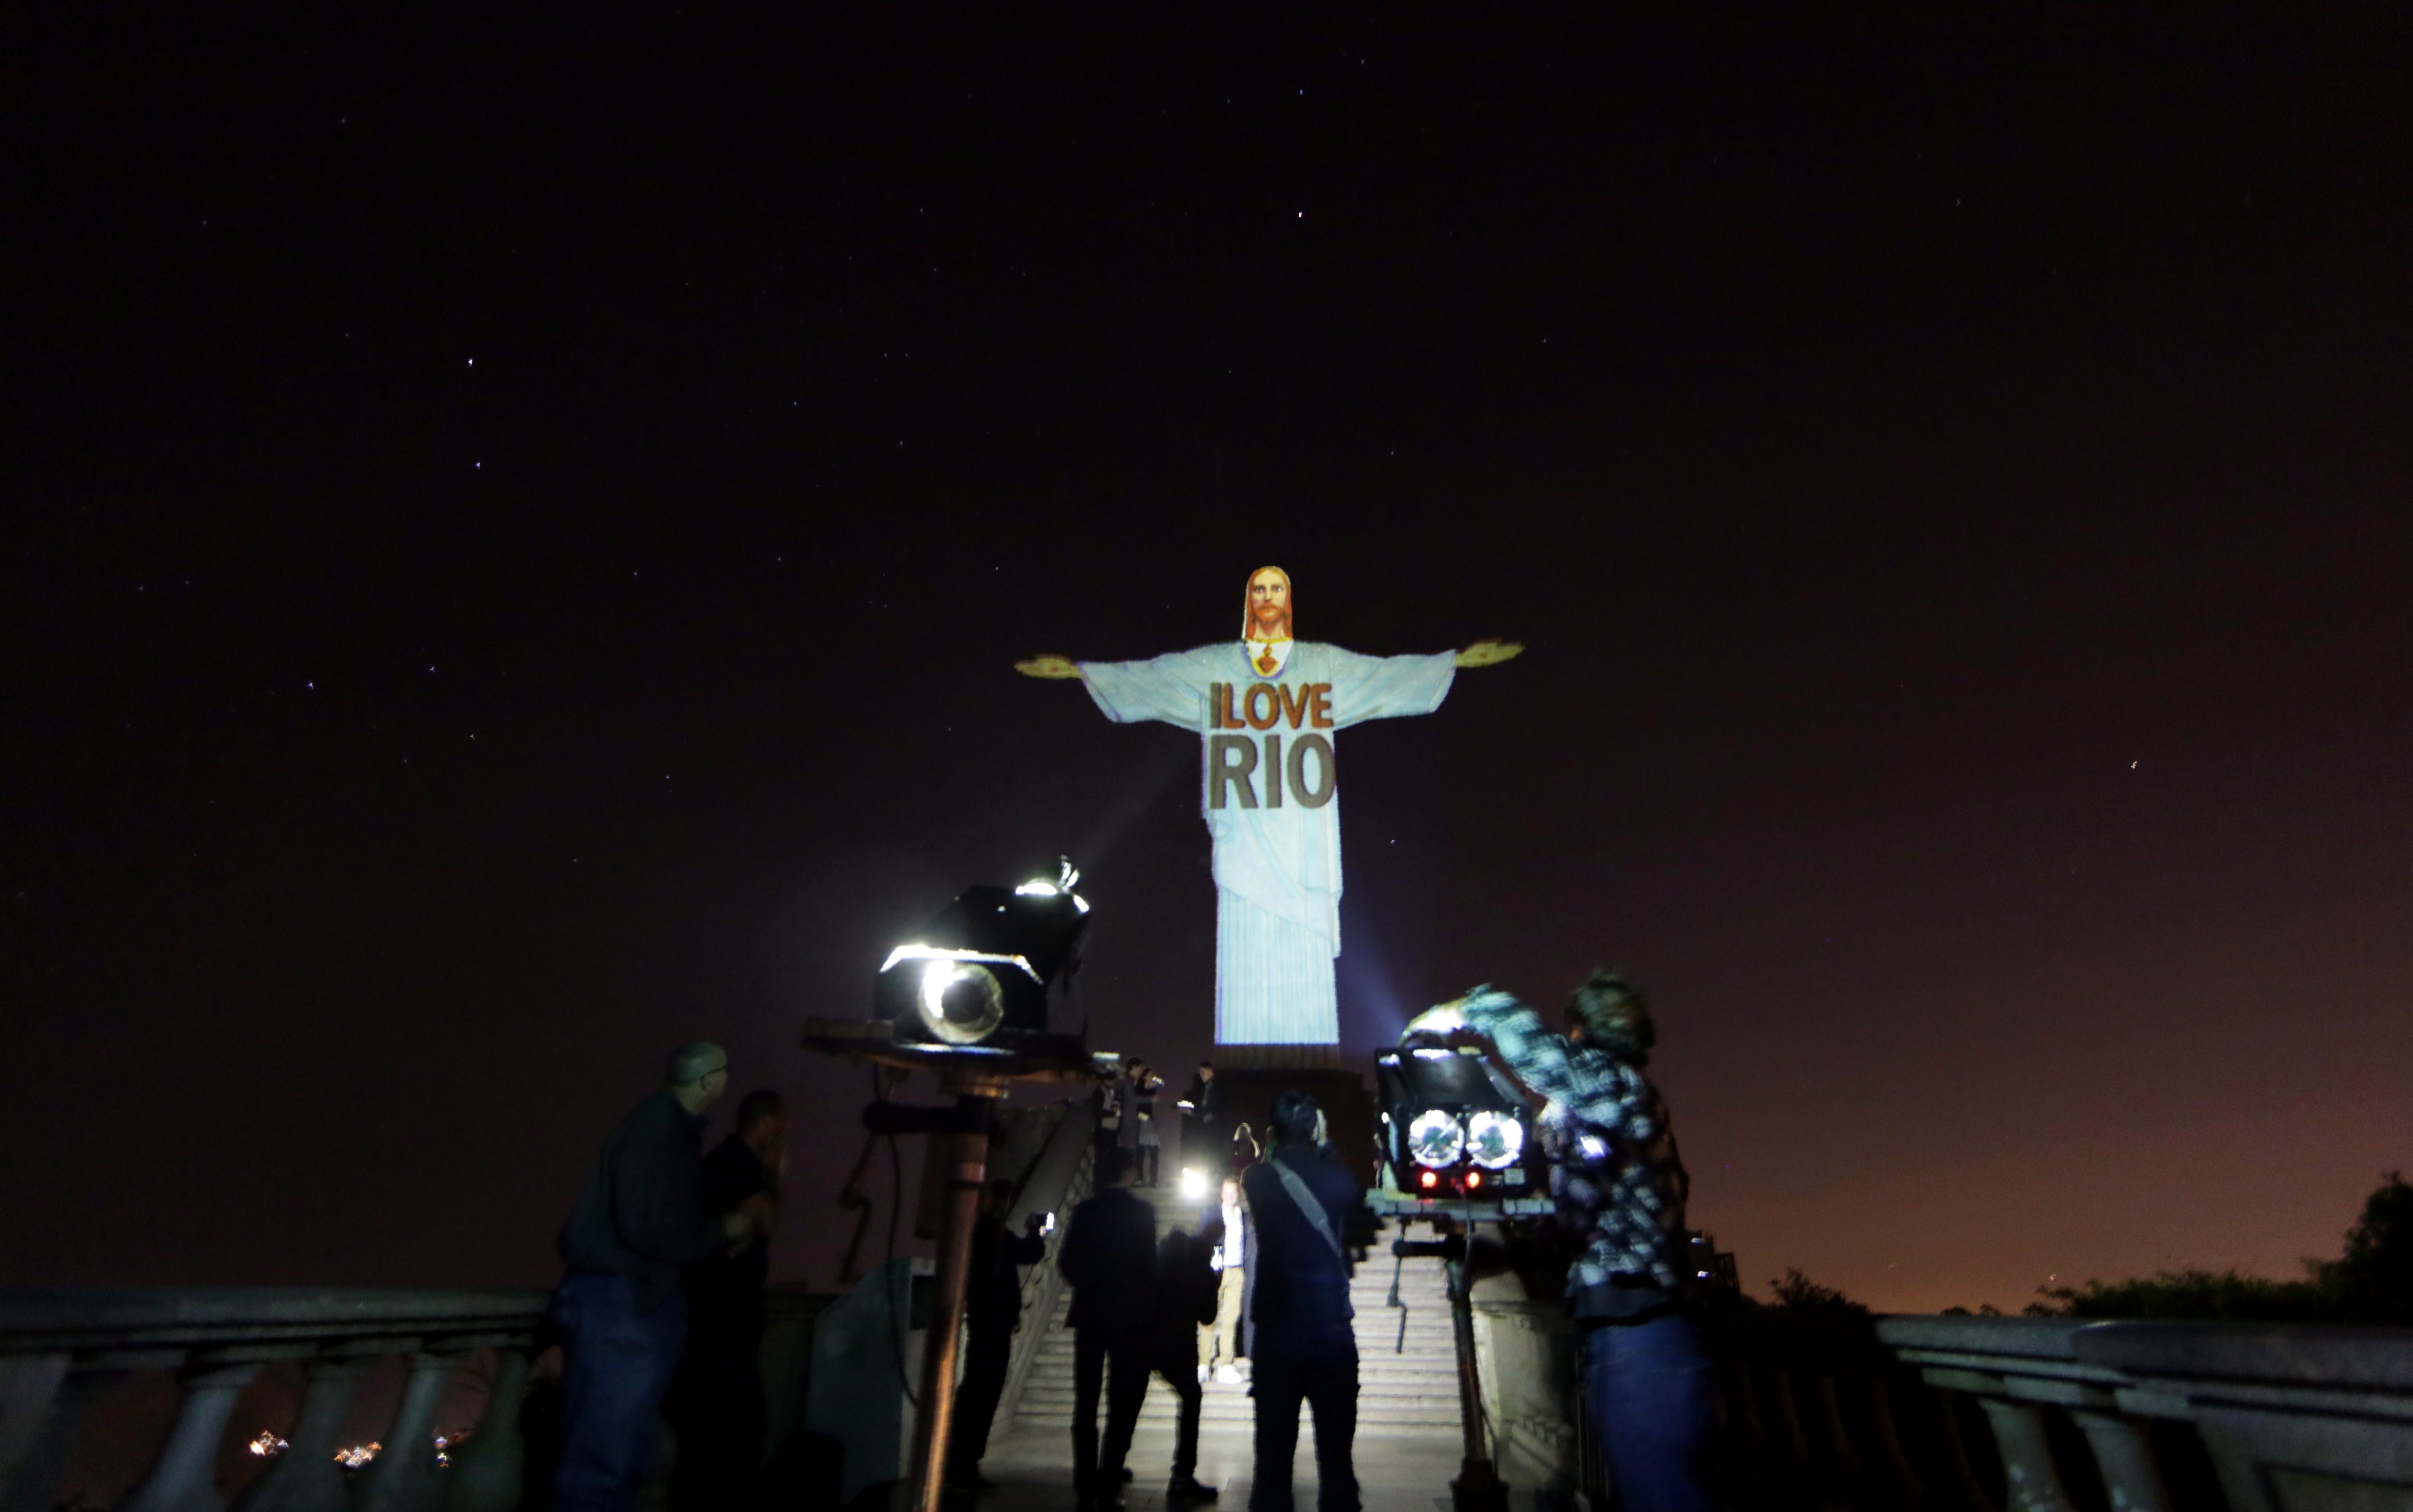 Projecting I LOVE RIO on Christ the redeemer statue